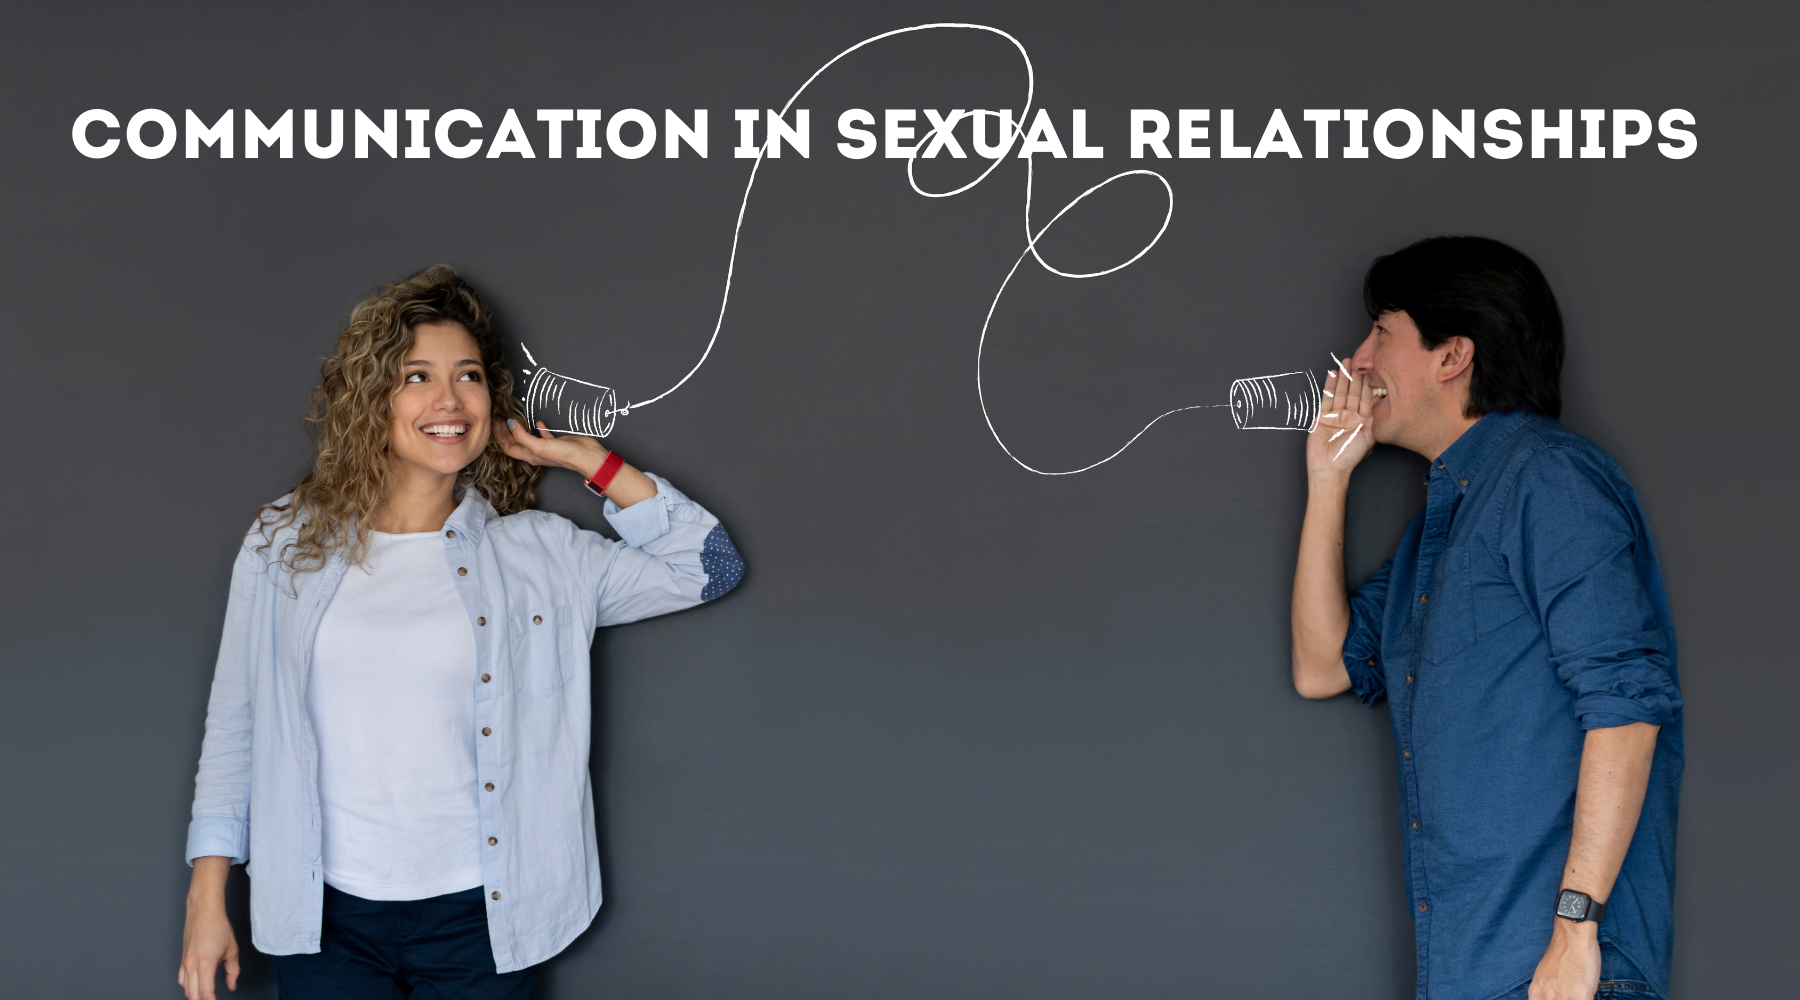 COMMUNICATION IN SEXUAL RELATIONSHIPS